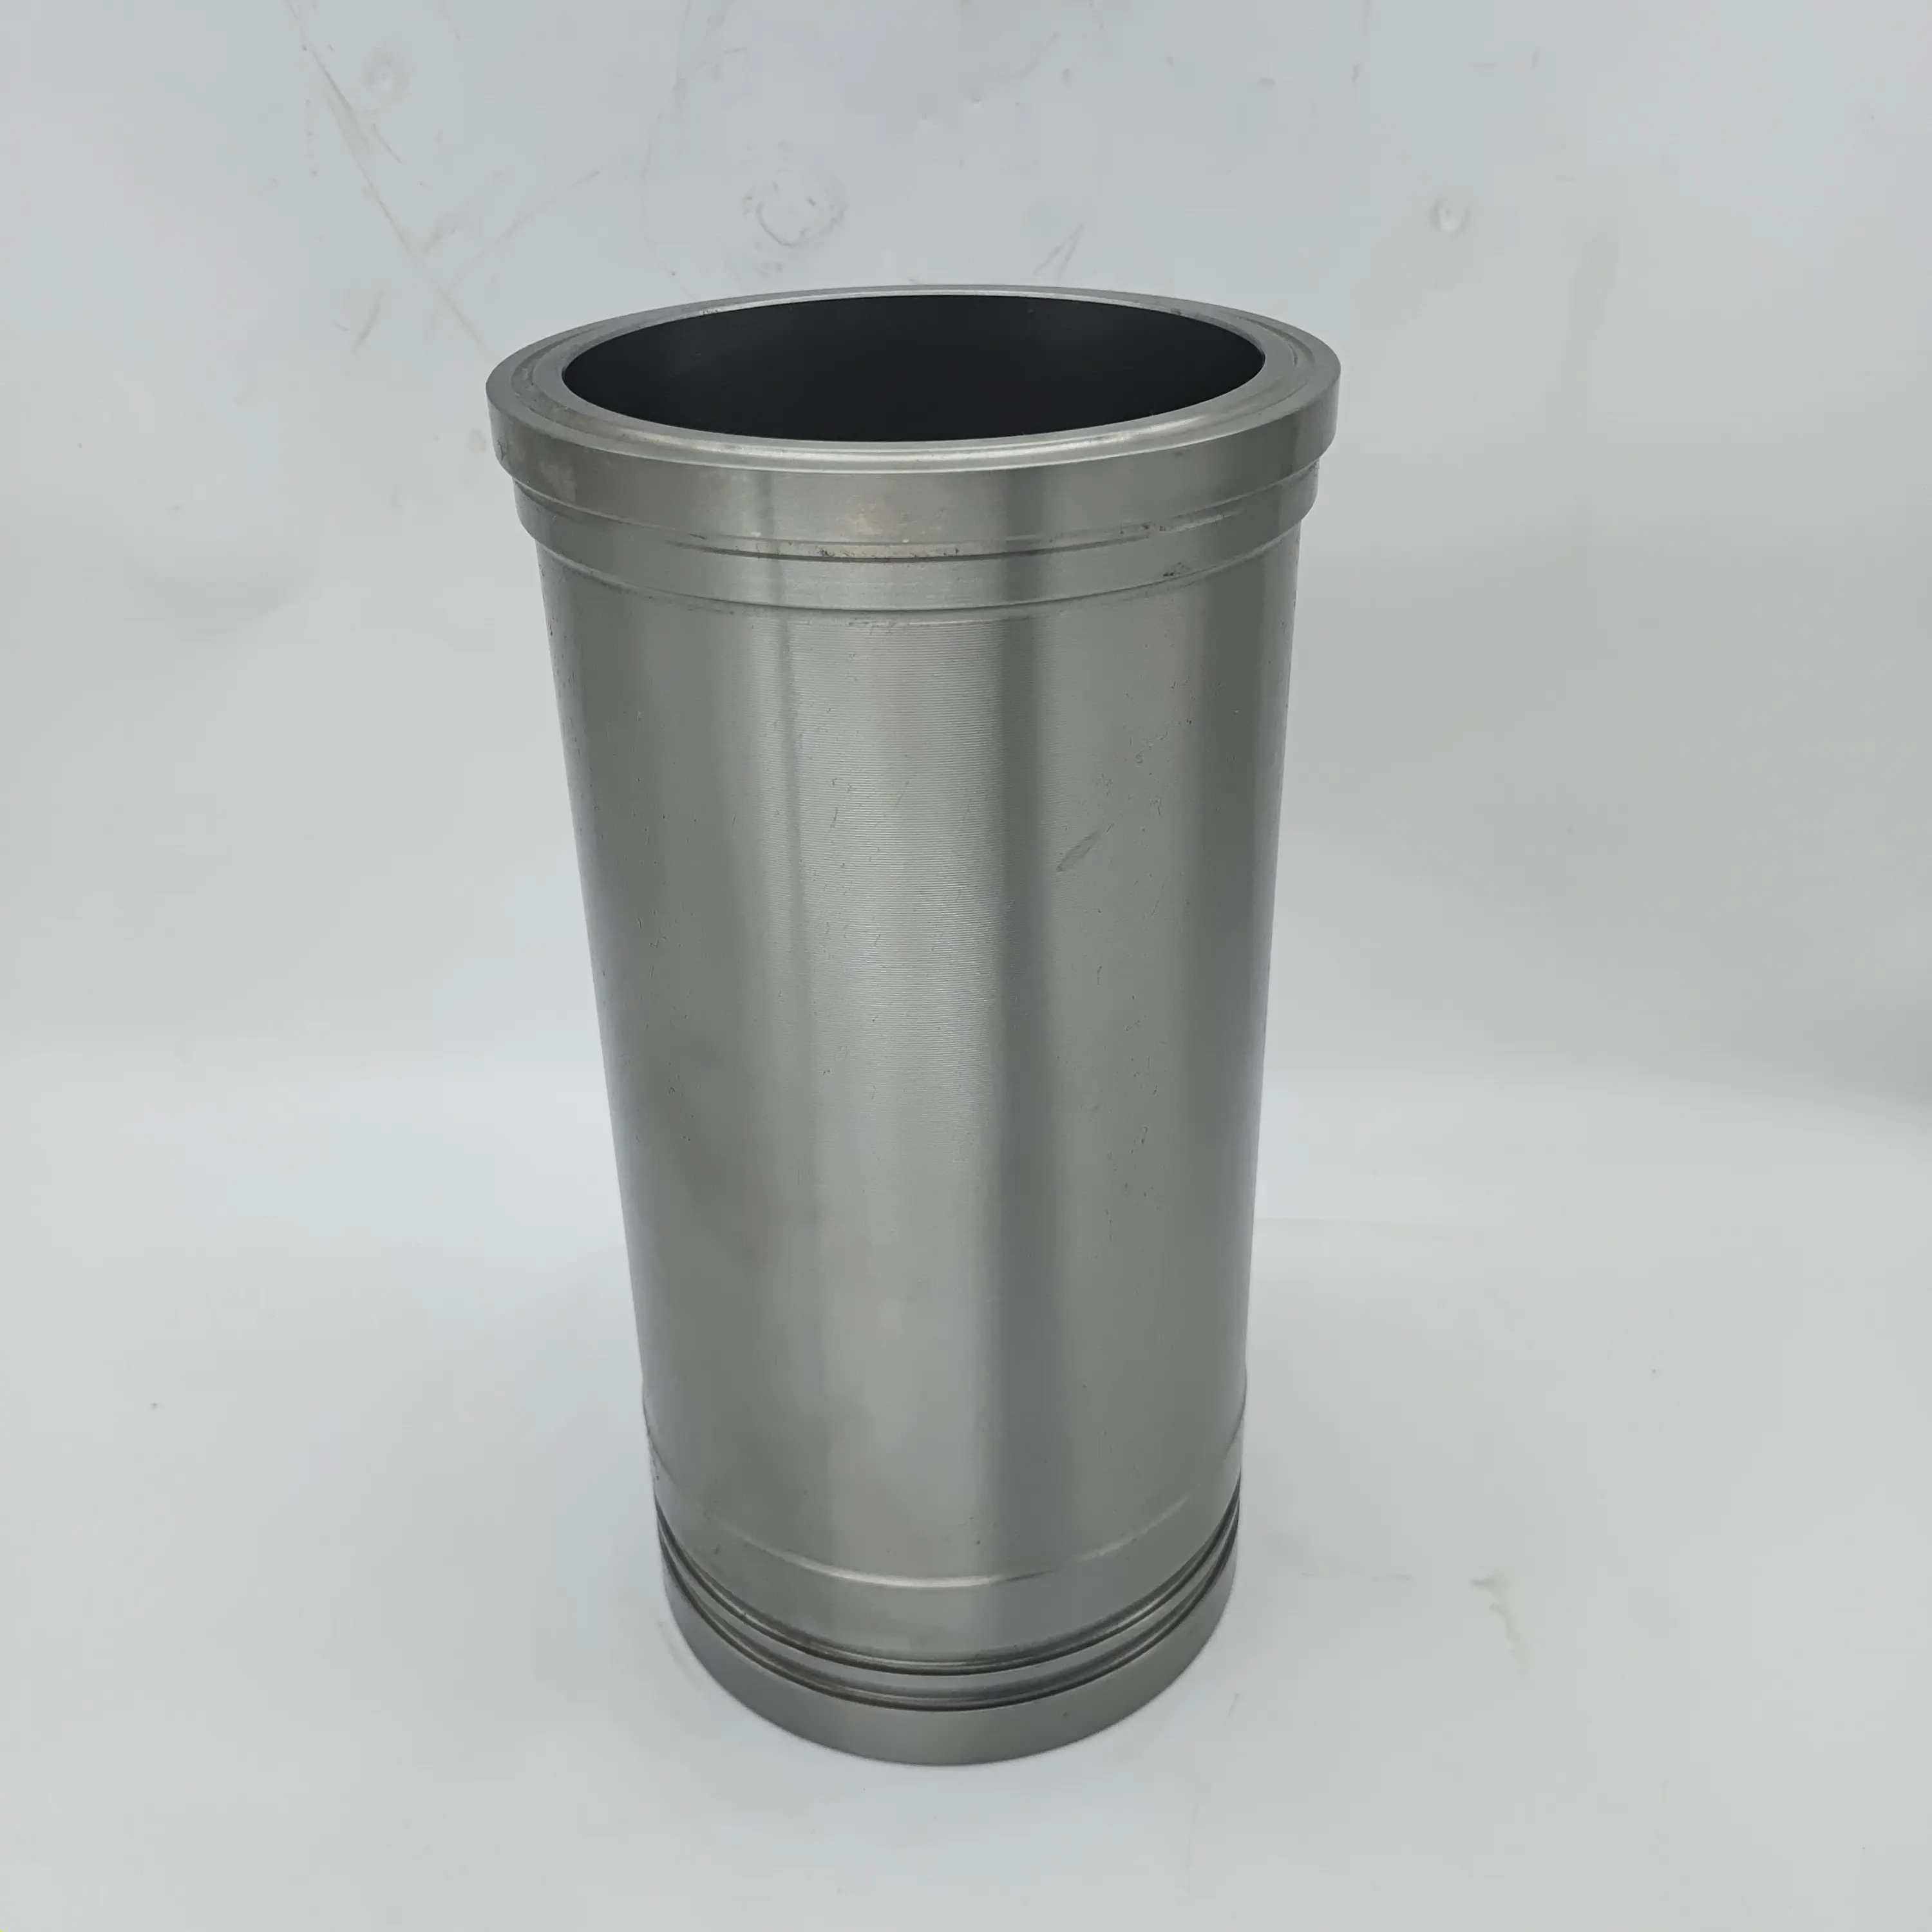 Machinery Engine Cylinder 8S2240 SleeveDiesel Engine Cylinder Liner 8S2240 Suitable For Caterpillar D333A 12E 1673 951B D4D